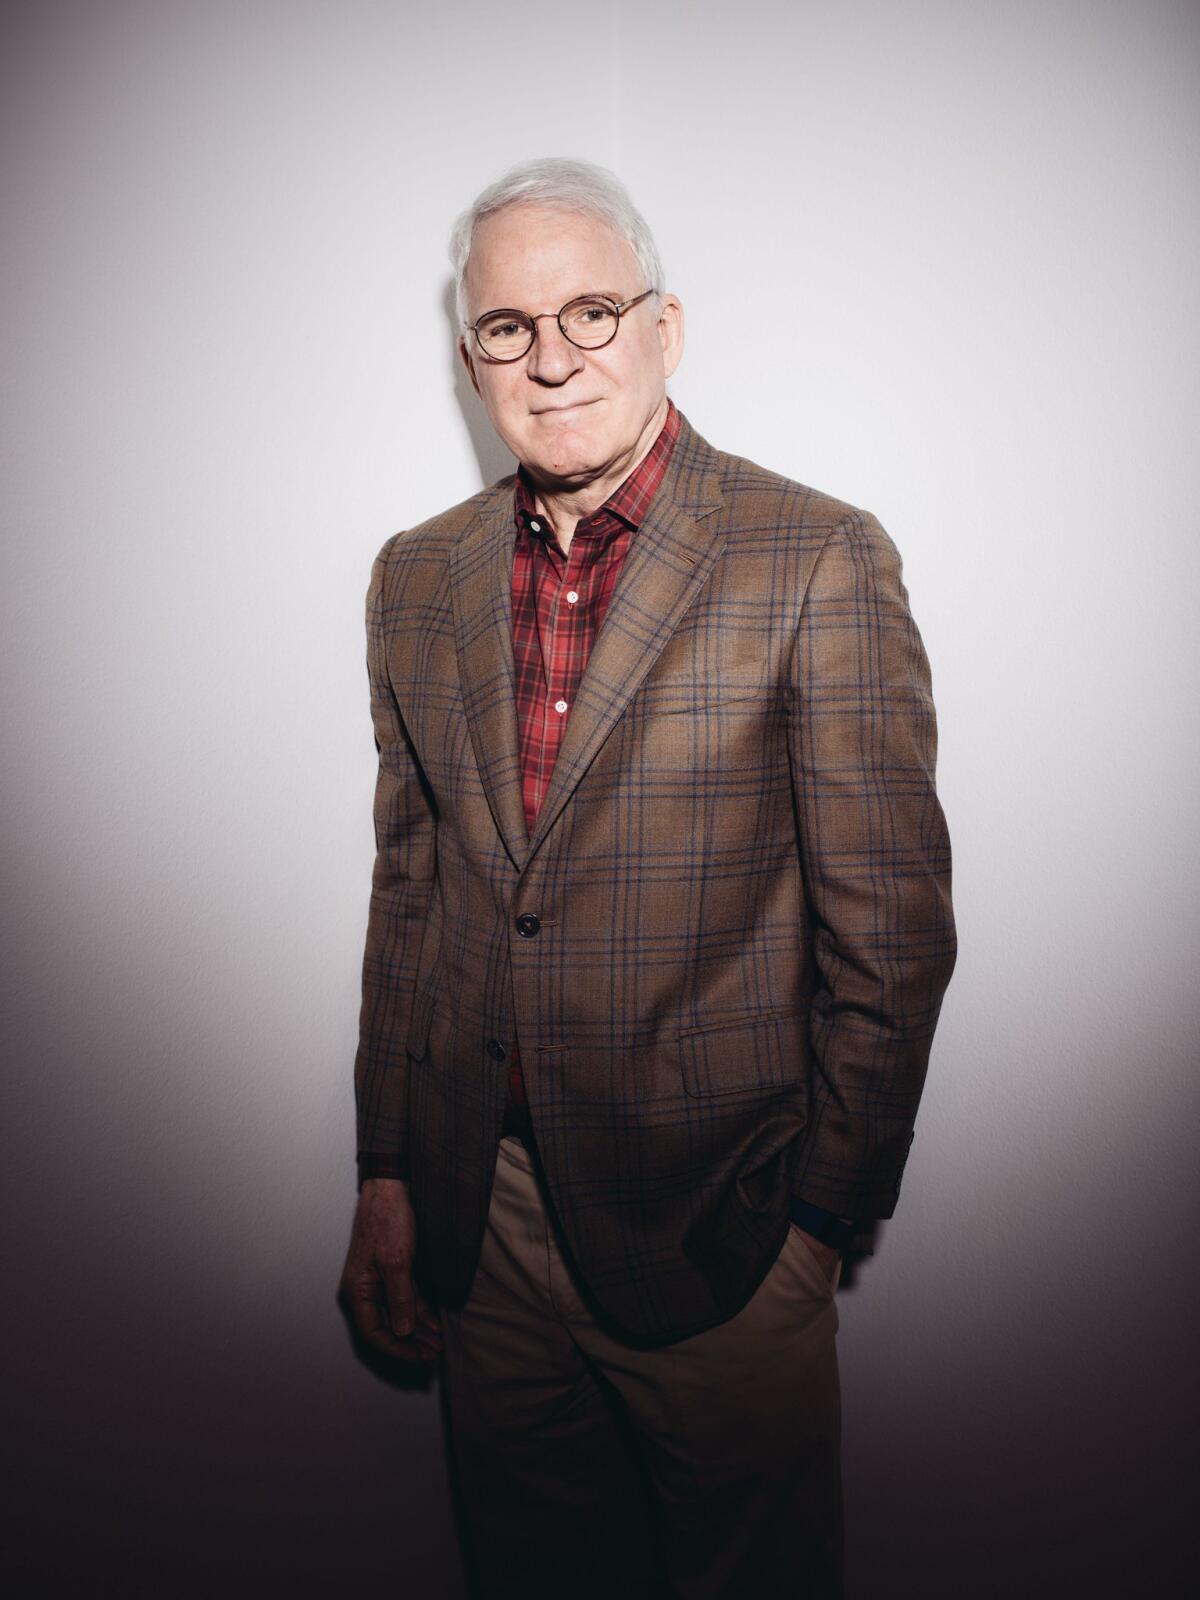 In this Wednesday, Oct. 7, 2015, photo, curator and actor-comedian Steve Martin poses for a portrait in a gallery for the exhibit "The Idea of North: The Paintings of Lawren Harris" at The Hammer Museum in Los Angeles. (Photo by Casey Curry/Invision/AP)